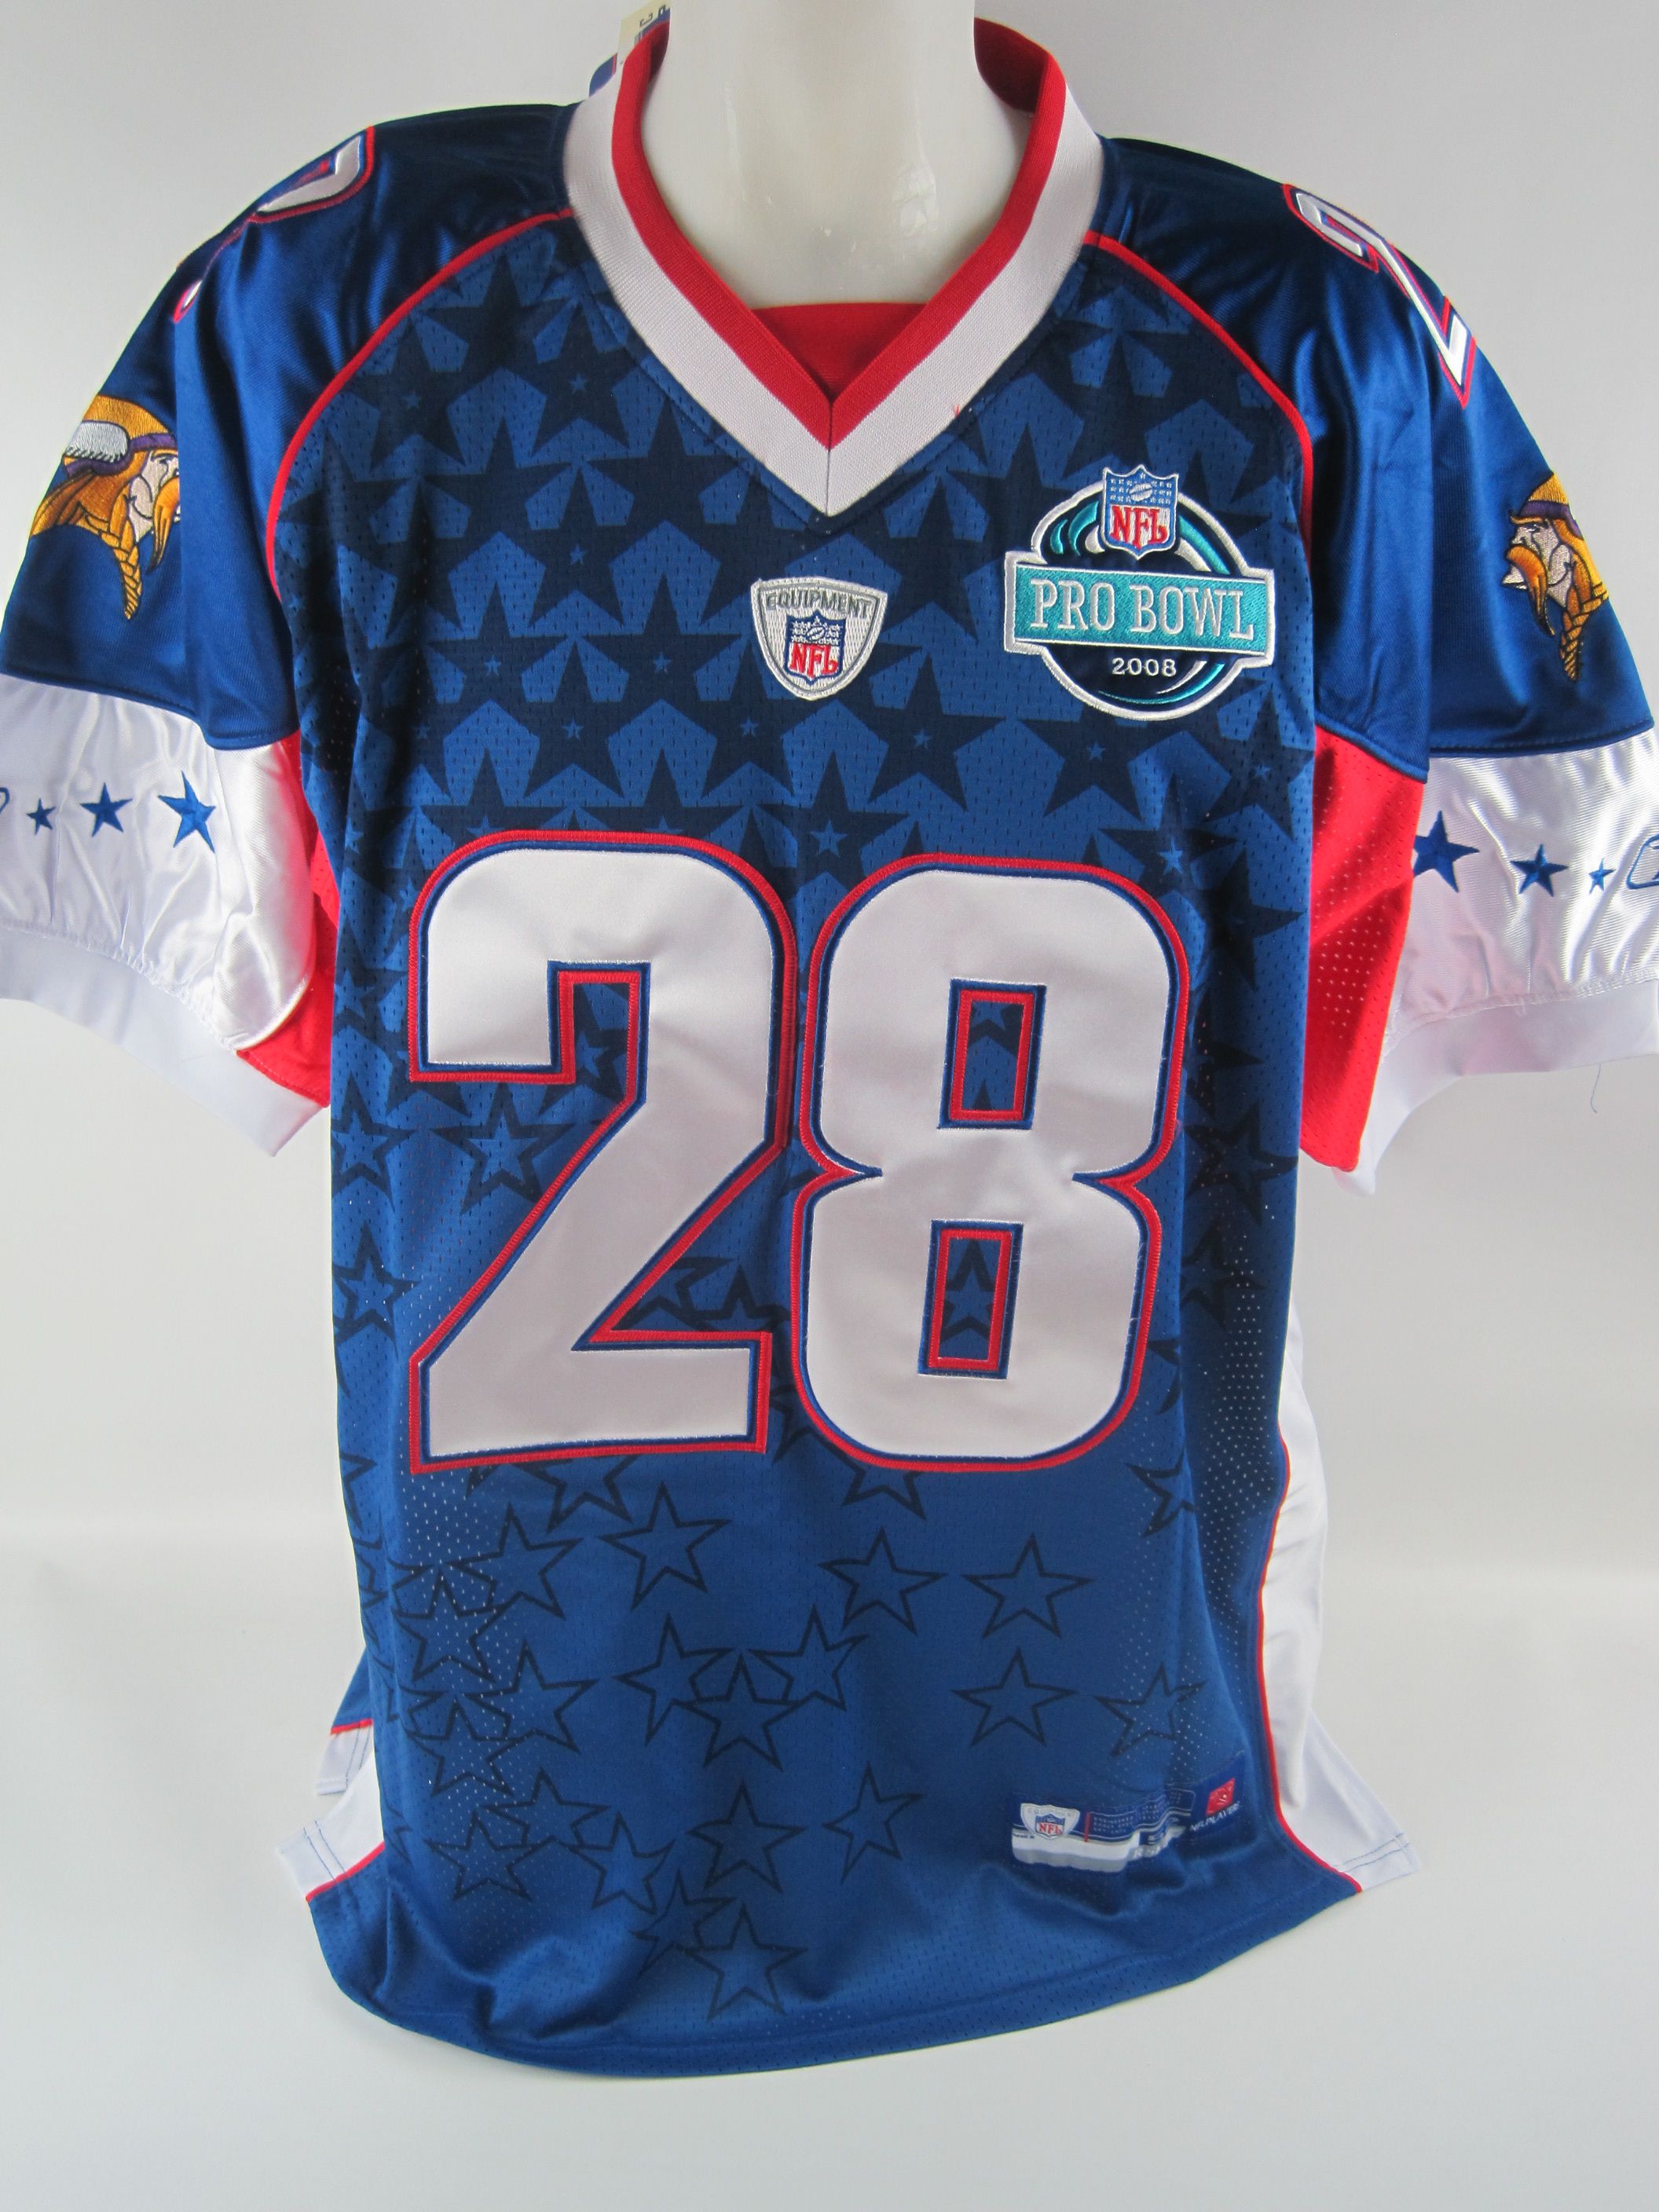 adrian peterson all star jersey